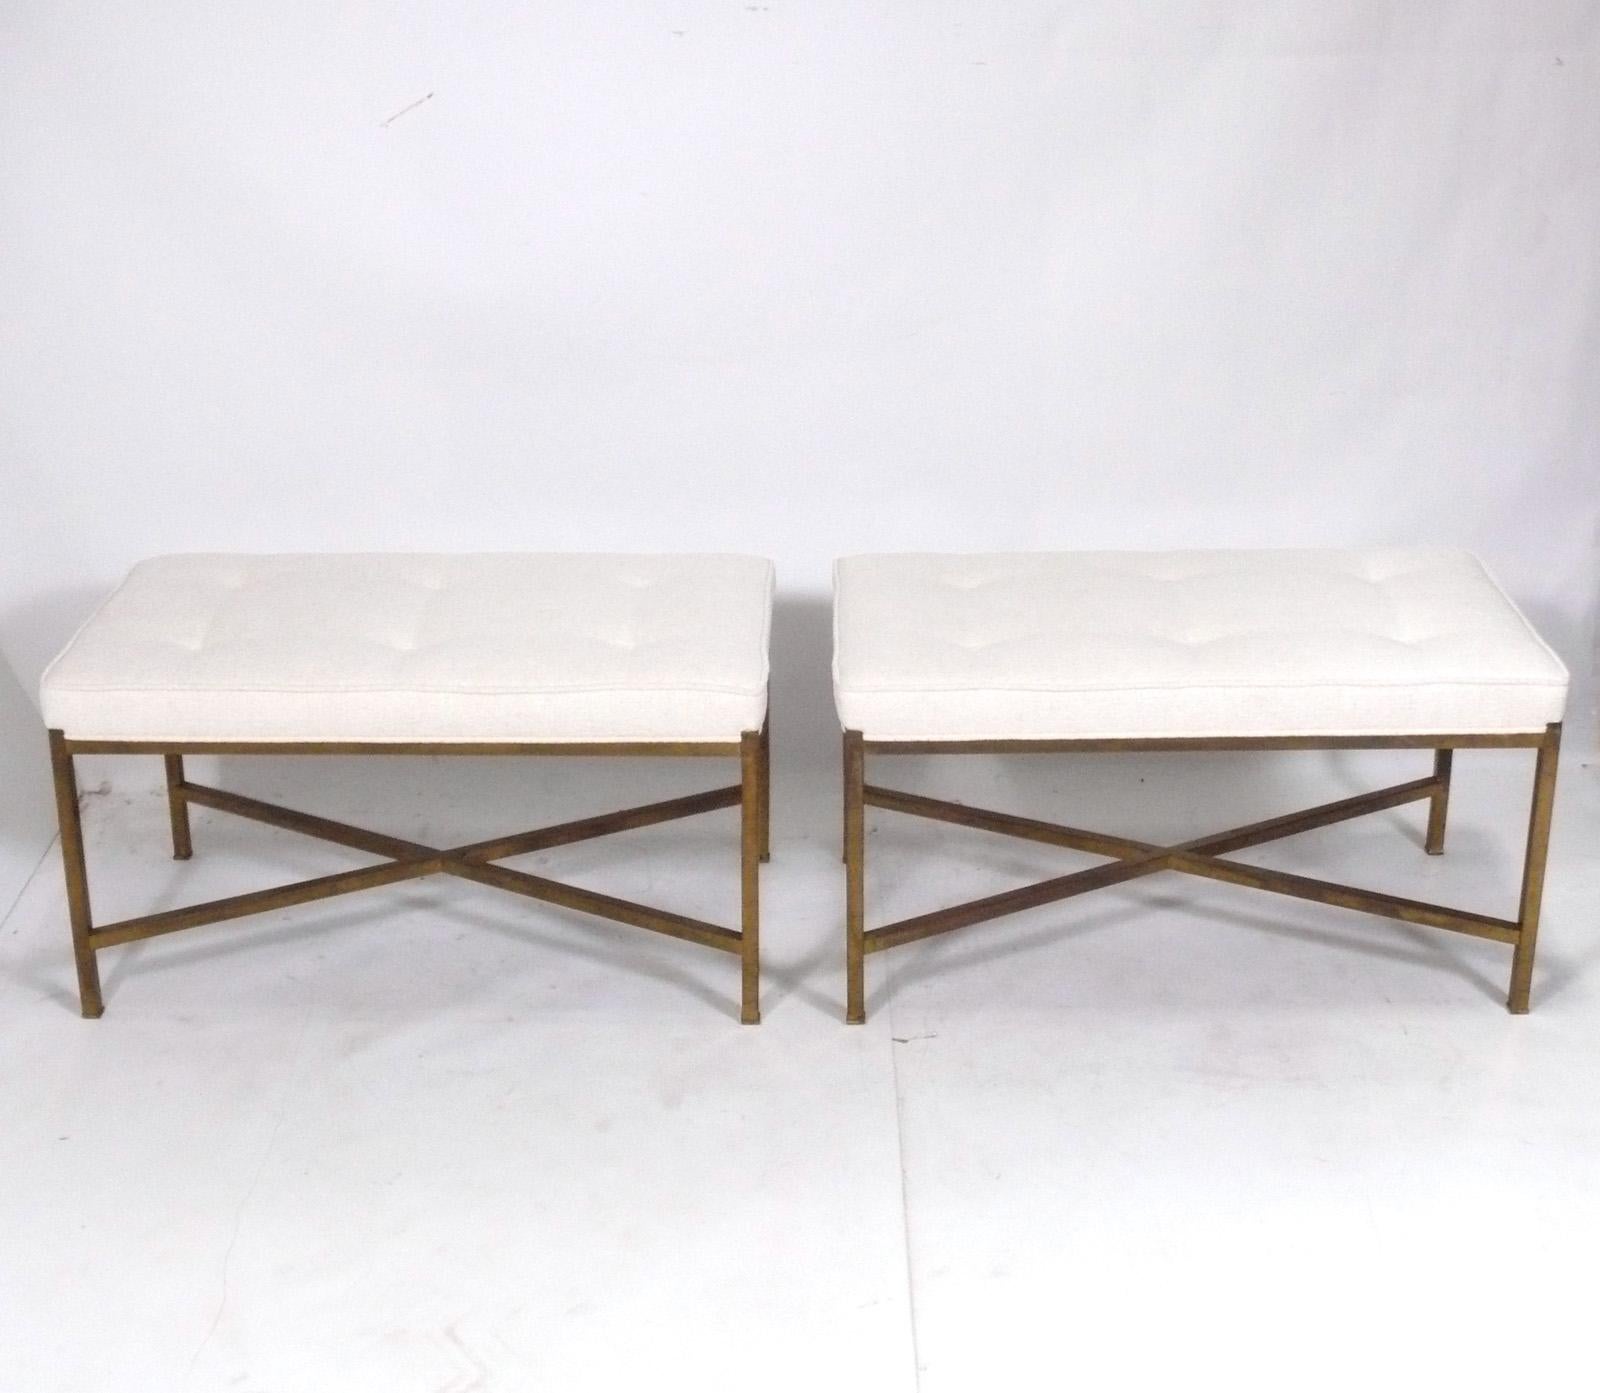 Selection of large scale sculptural X-based brass benches, in the manner of Paul Mccobb, American, circa 1950s. They retain their original distressed patina to the bases, and have been newly reupholstered in an ivory colored upholstery.